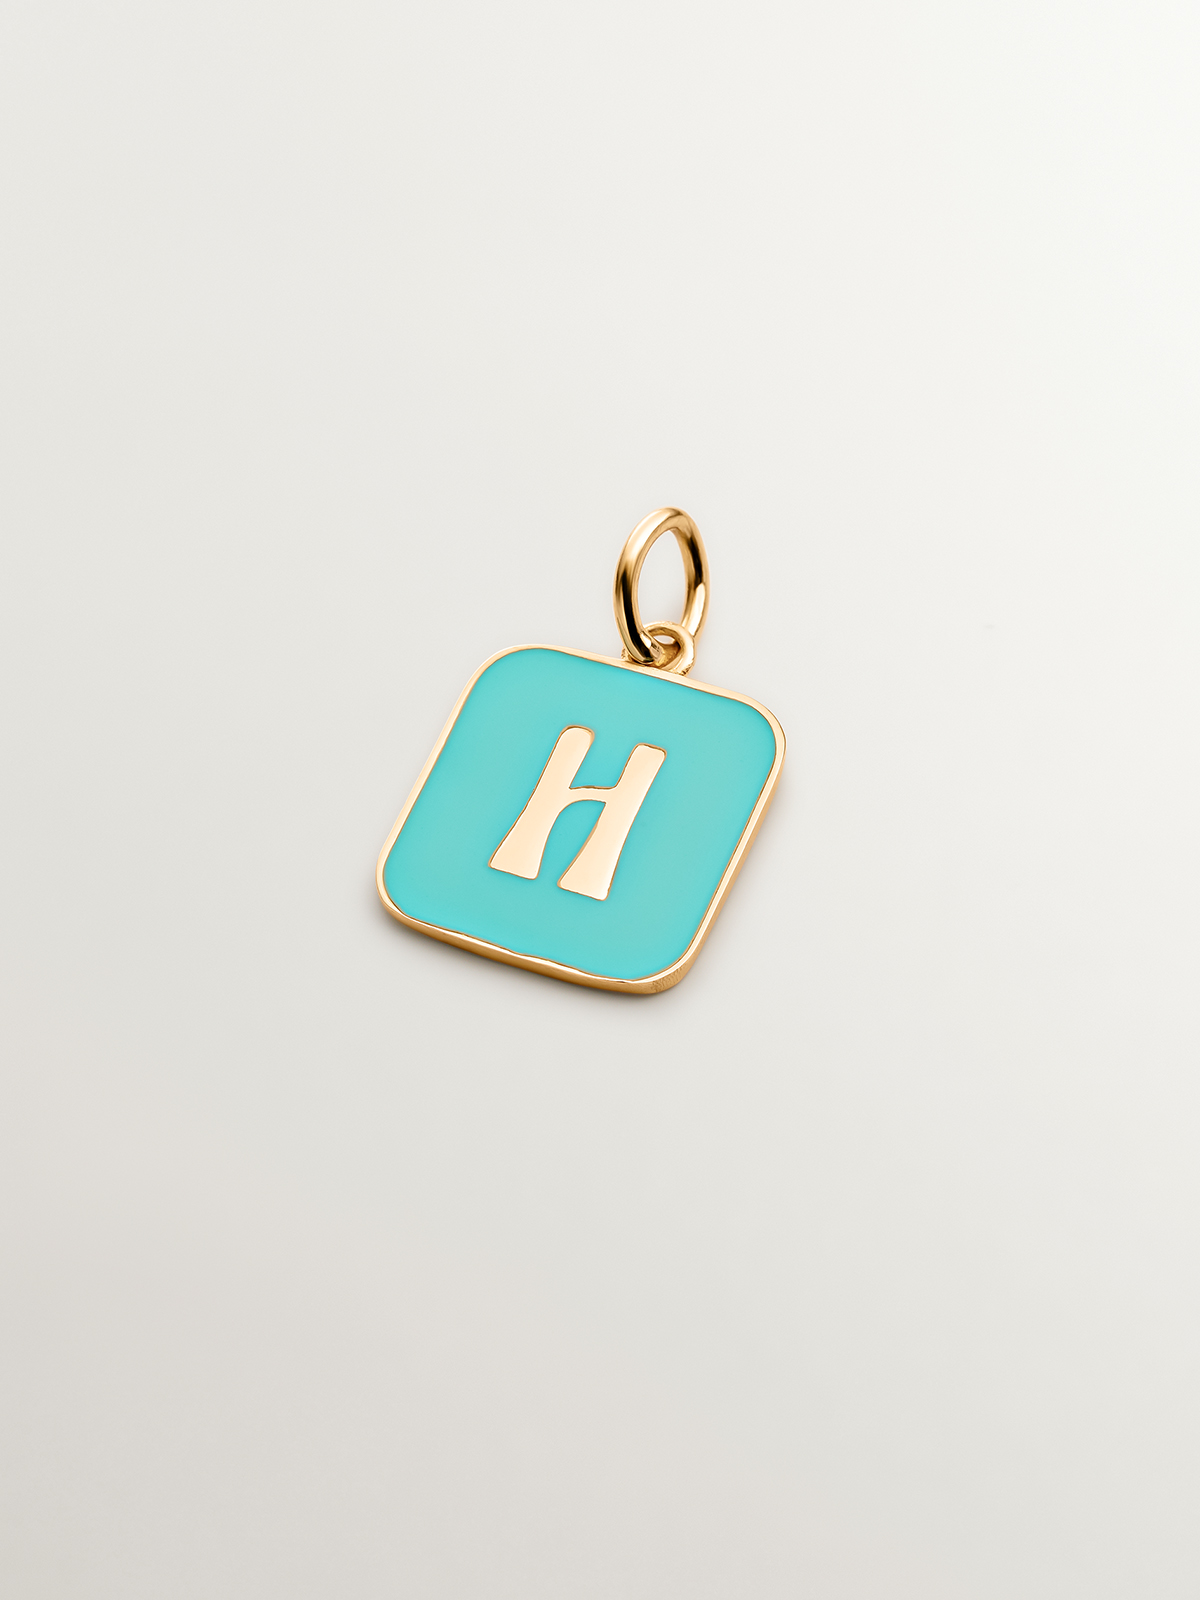 18K yellow gold plated 925 sterling silver charm with H initial and turquoise enamel in a square shape